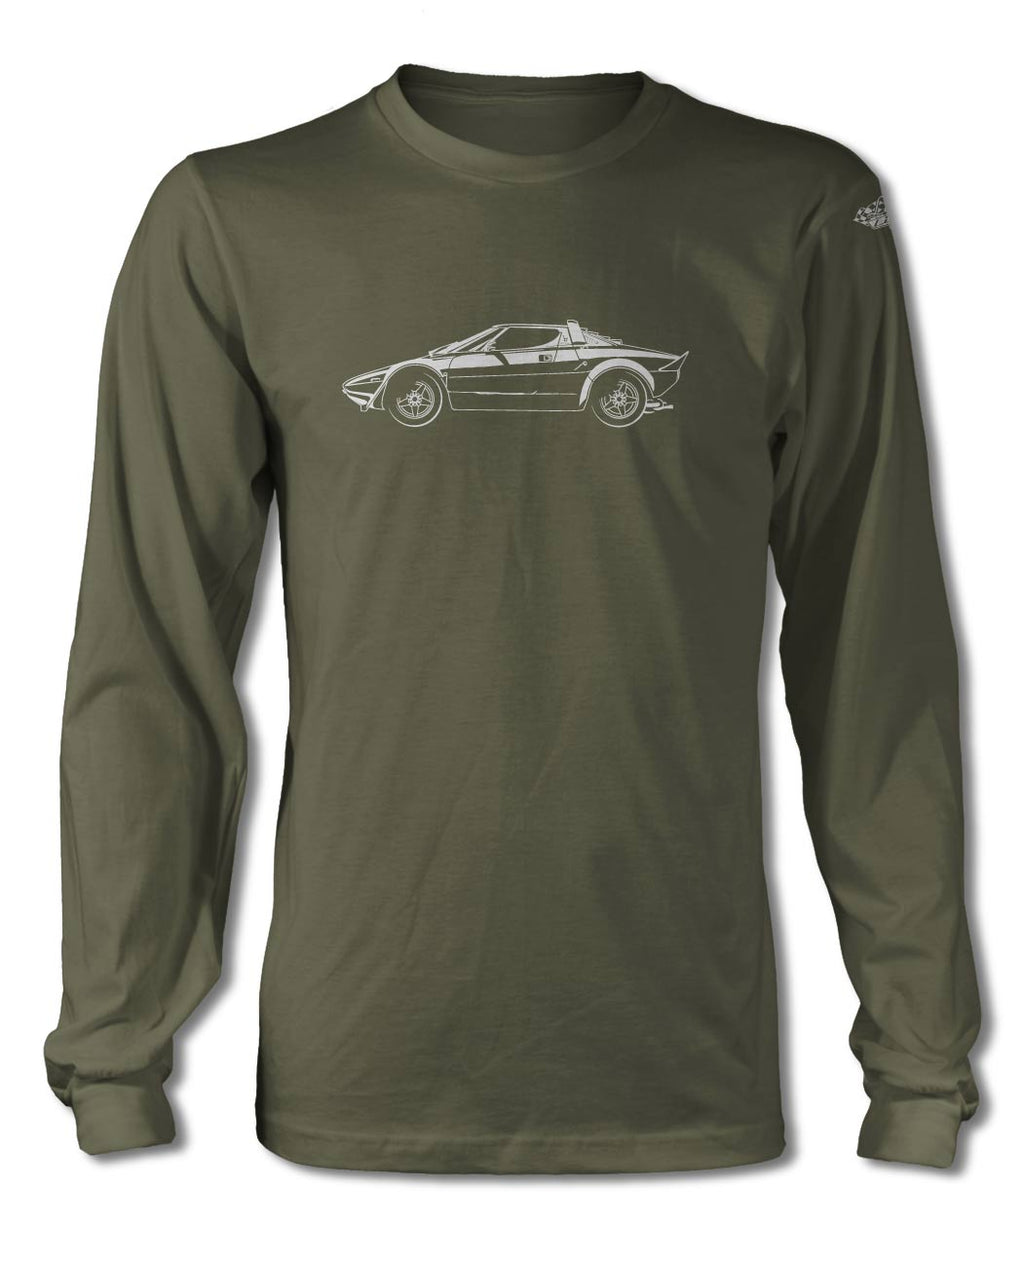 Lancia Stratos Coupe T-Shirt - Long Sleeves - Side View